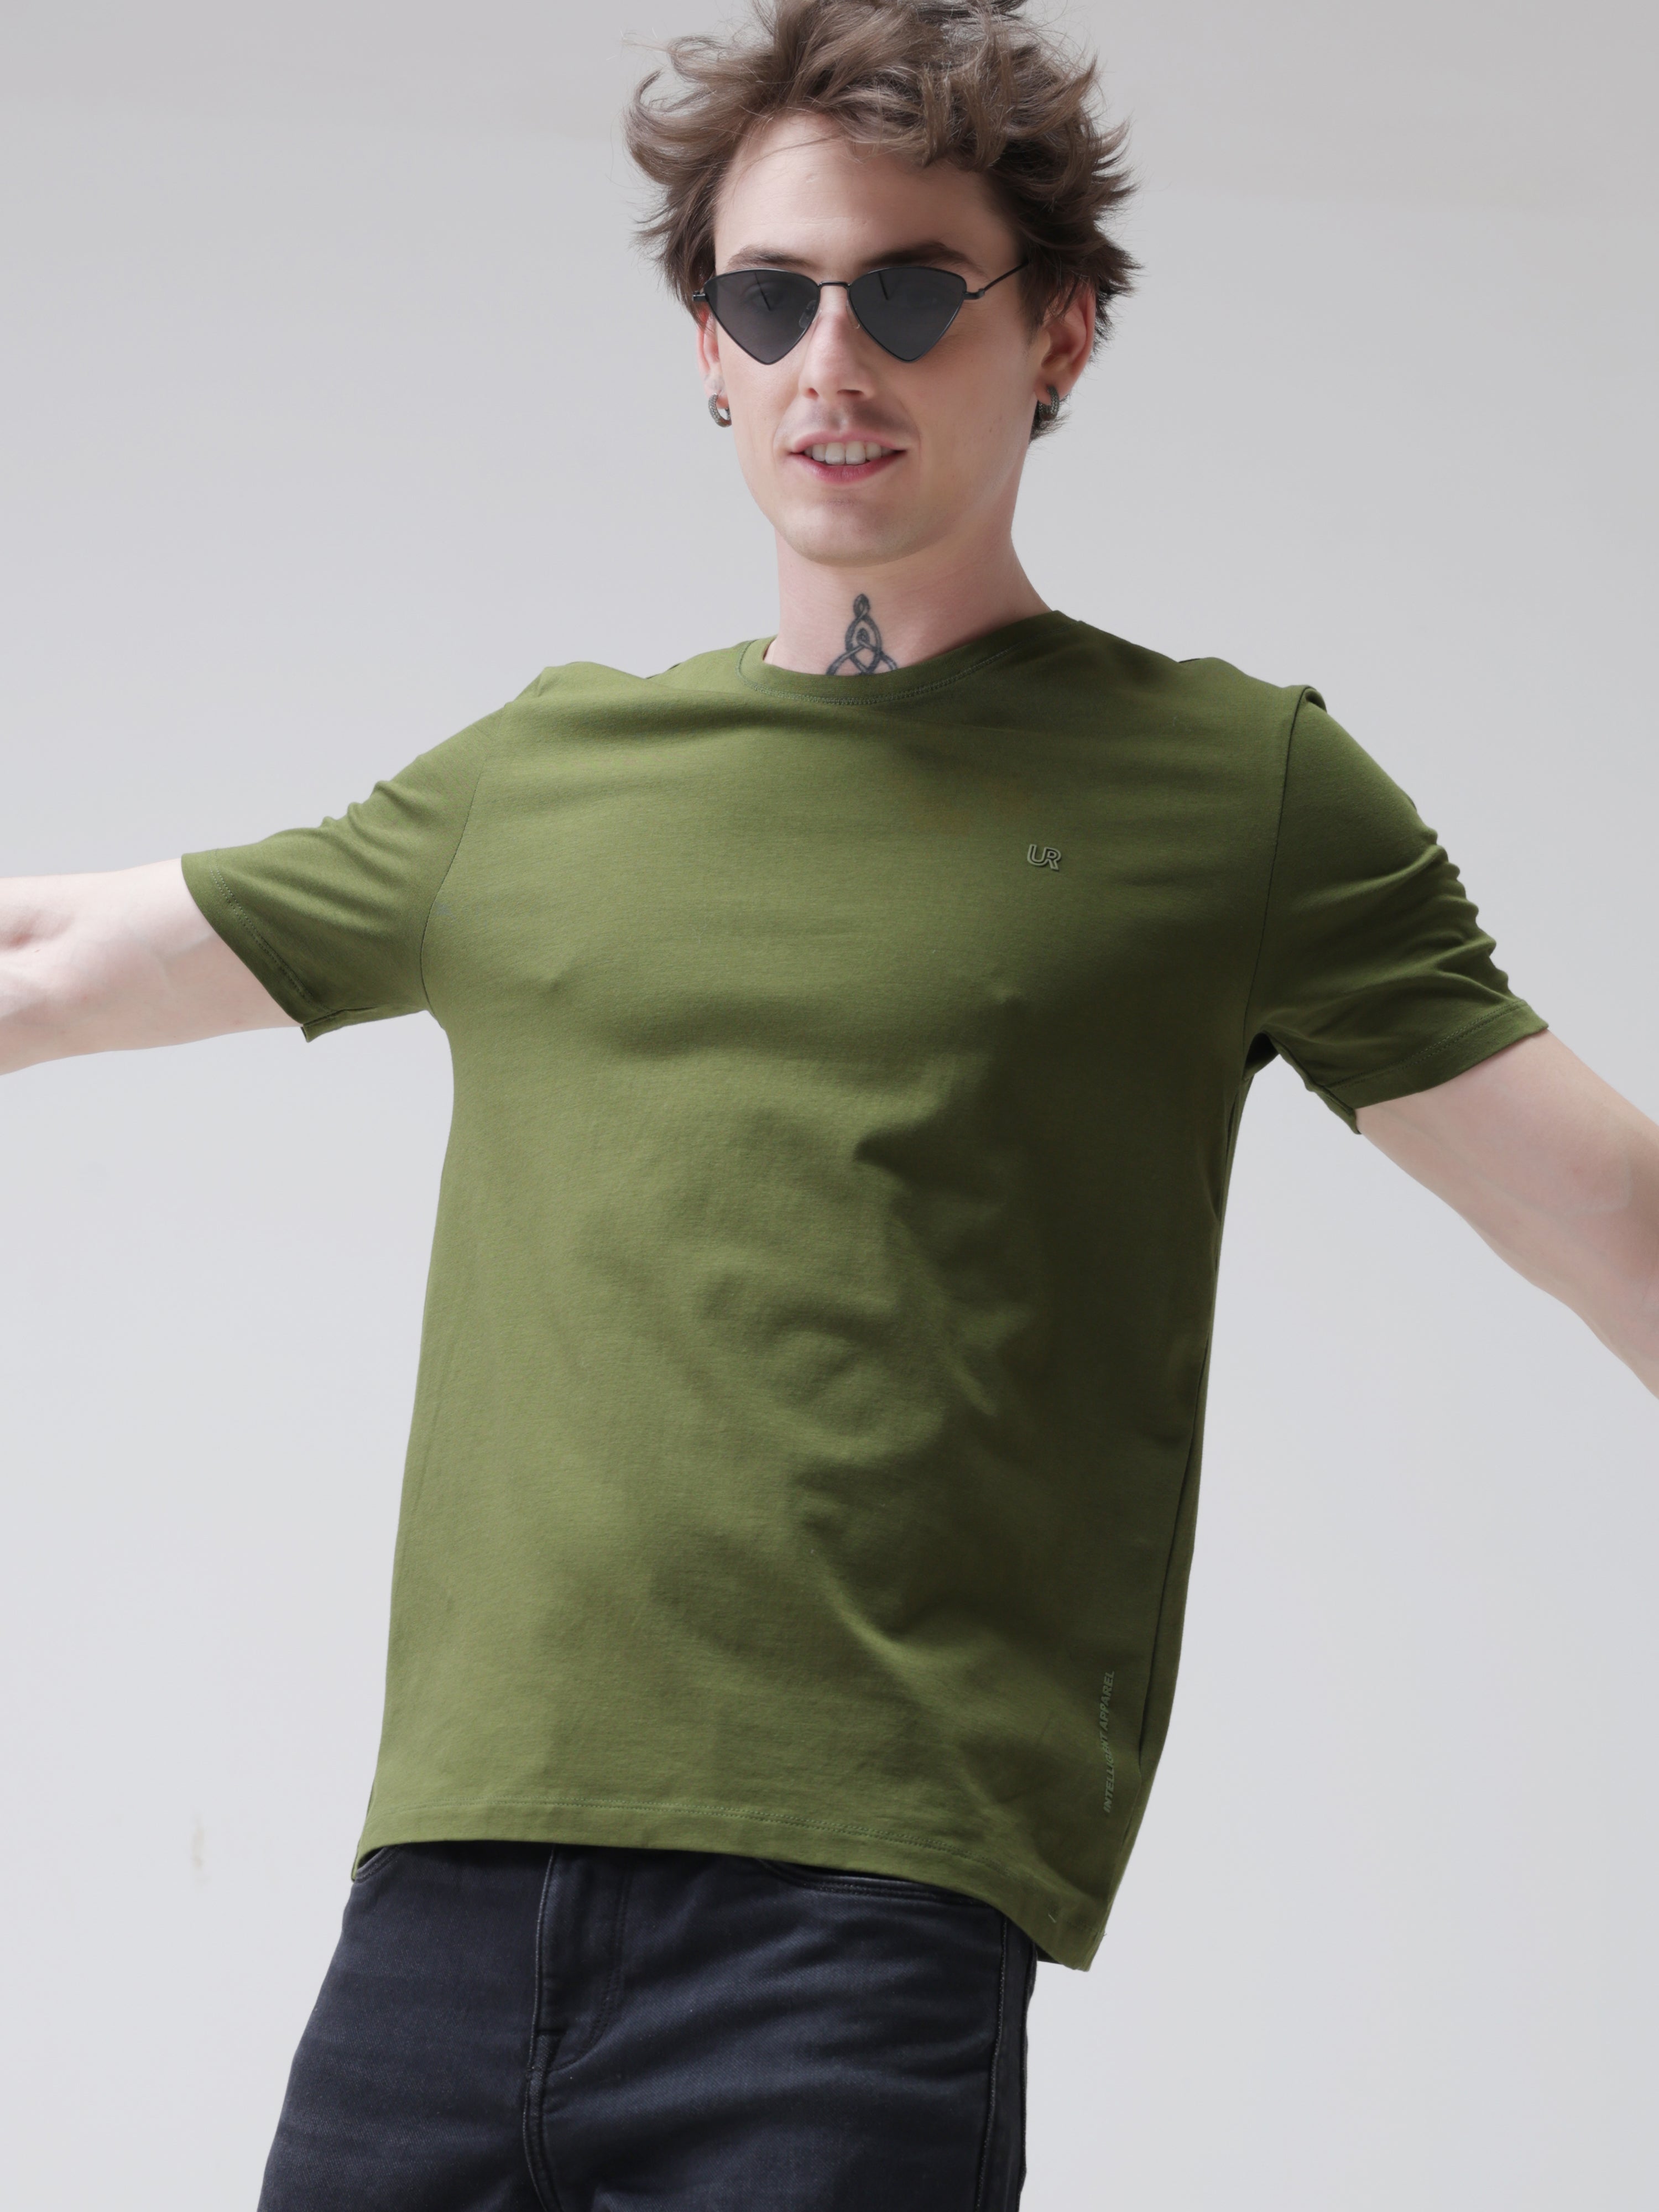 Man wearing green Turms round-neck T-shirt, tailored fit, anti-stain, odor-resistant, premium cotton spandex, menswear.